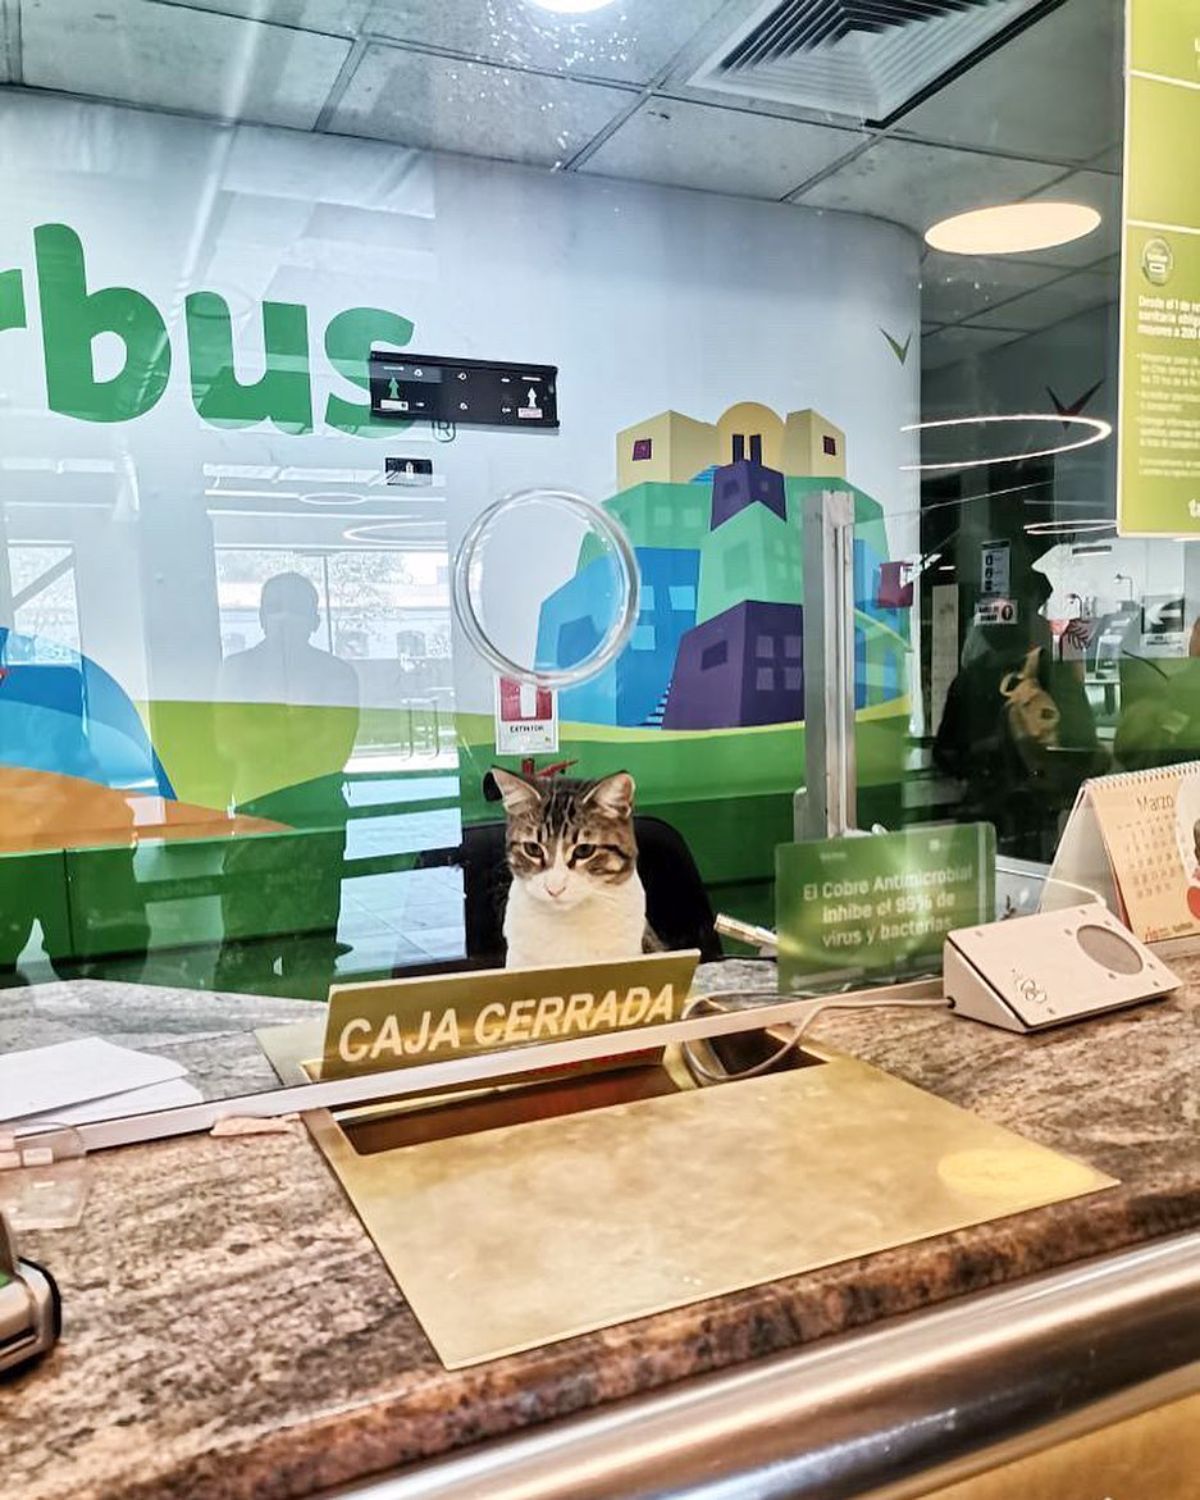 grey and white tabby cat sitting behind a cashier counter